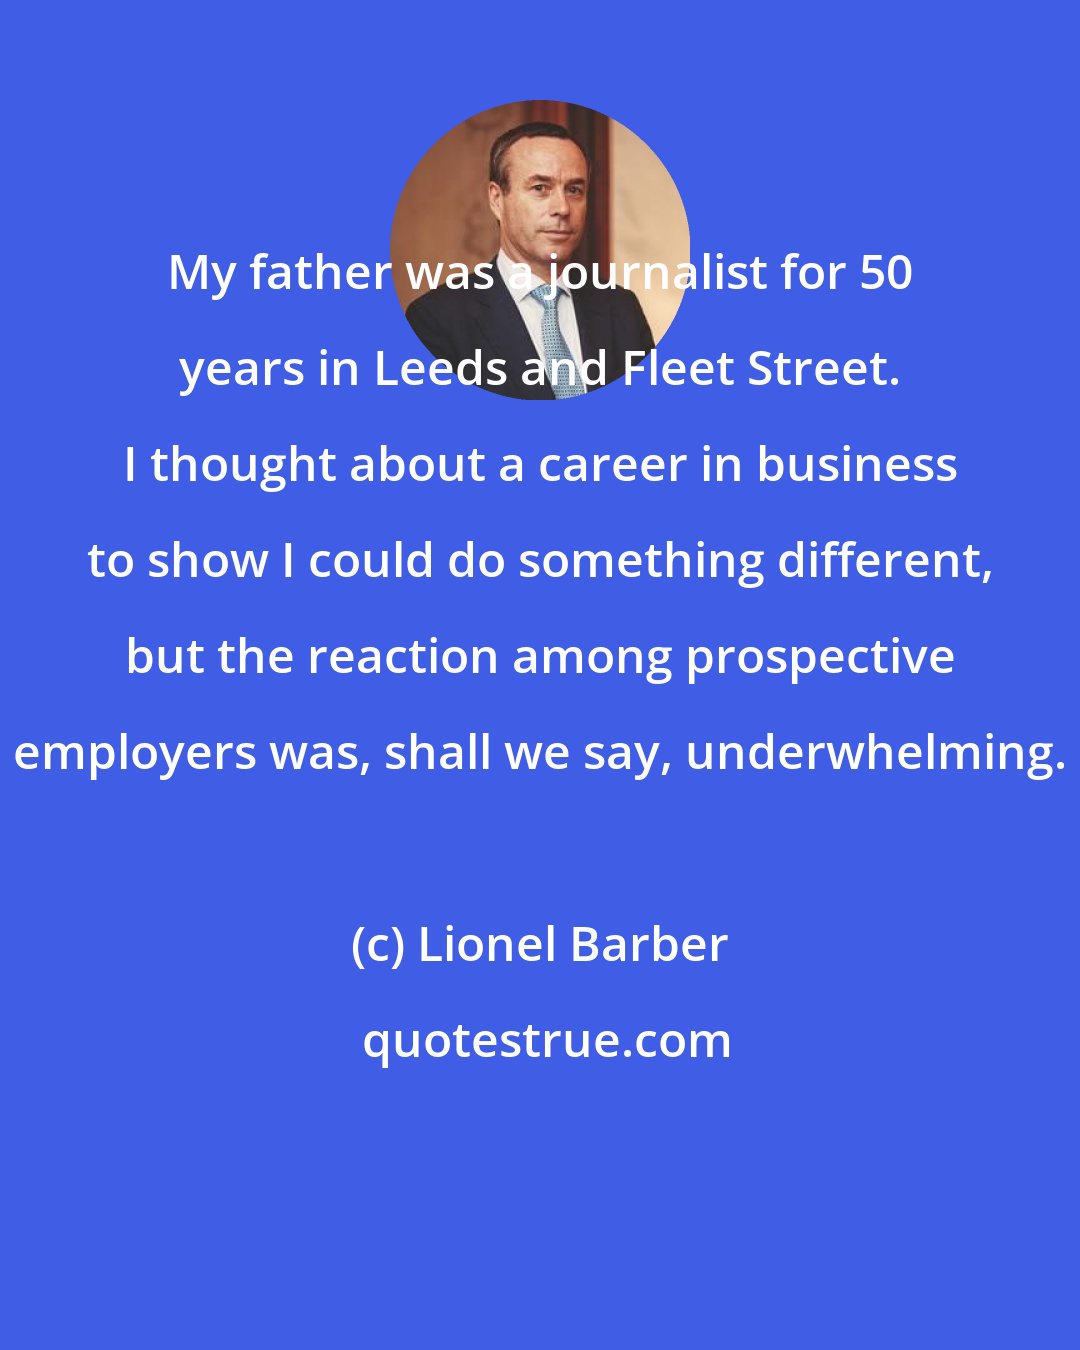 Lionel Barber: My father was a journalist for 50 years in Leeds and Fleet Street. I thought about a career in business to show I could do something different, but the reaction among prospective employers was, shall we say, underwhelming.